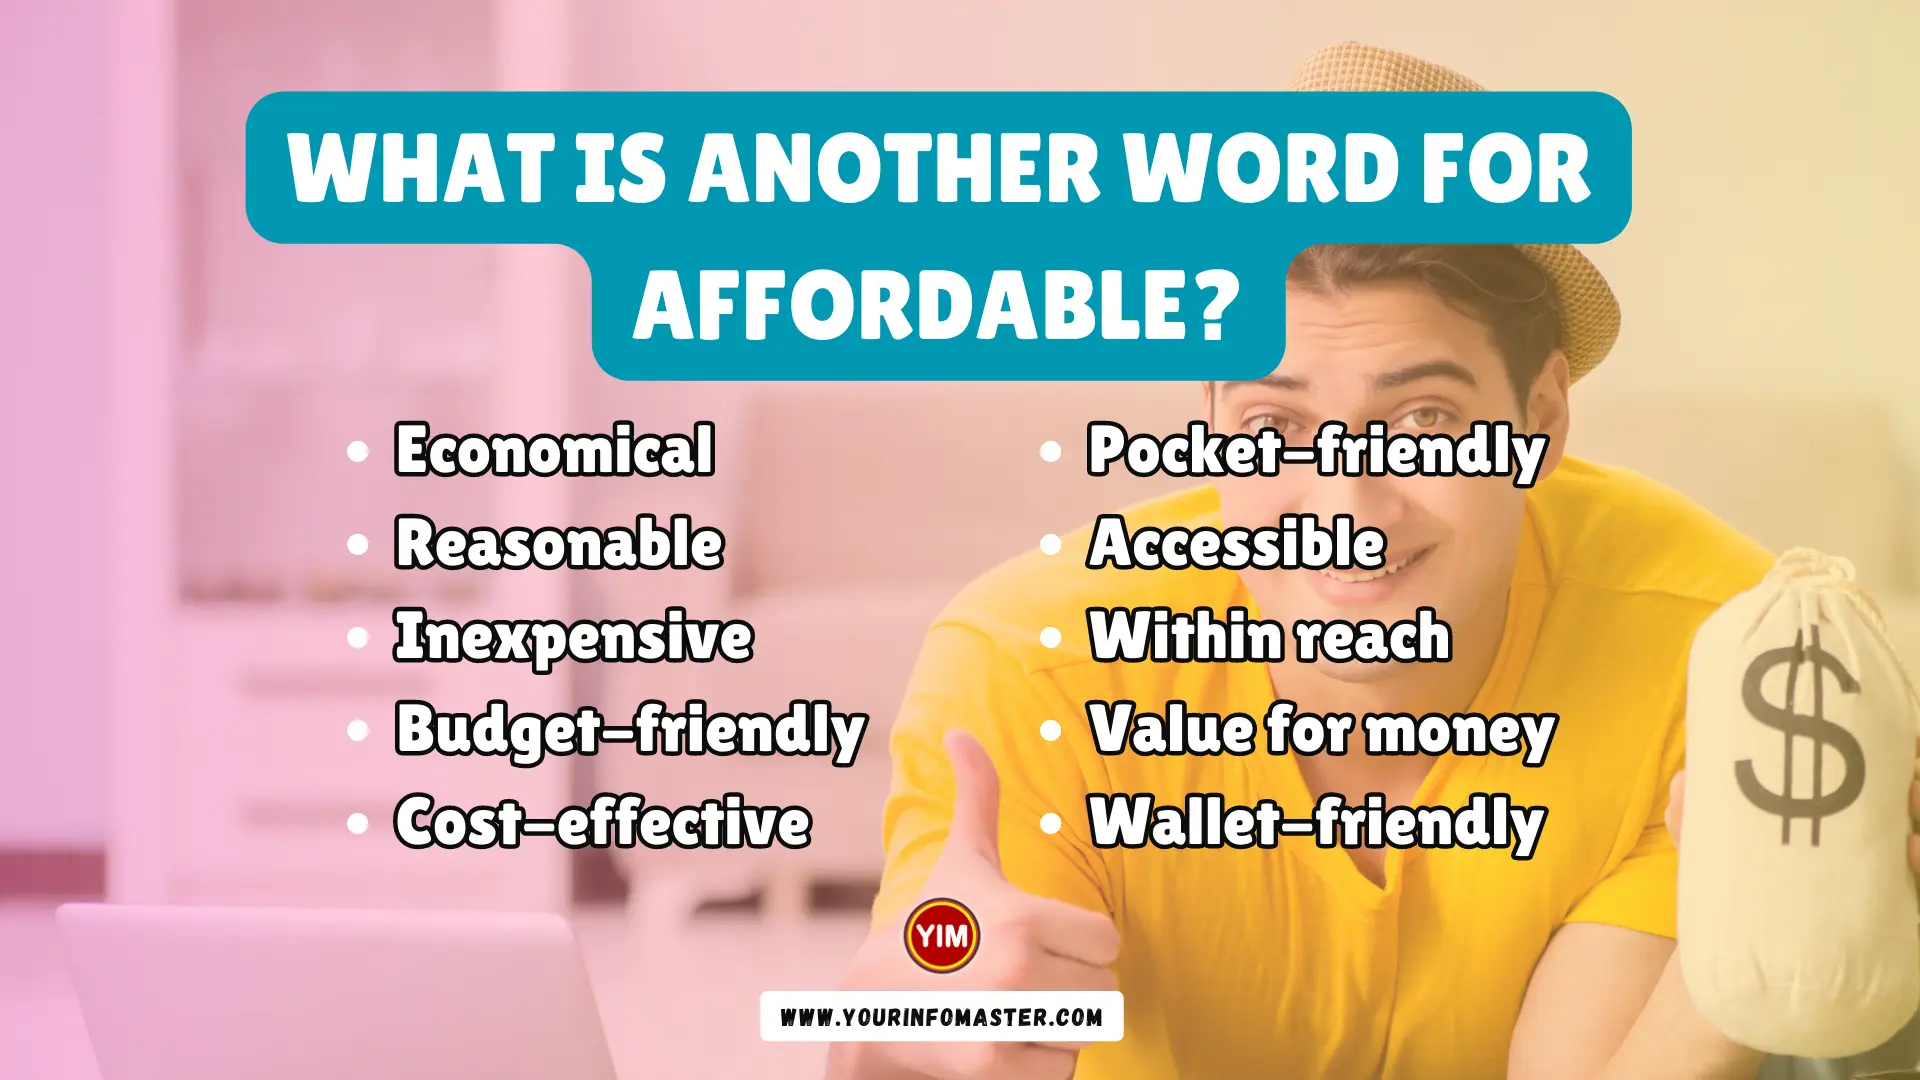 What is another word for Affordable